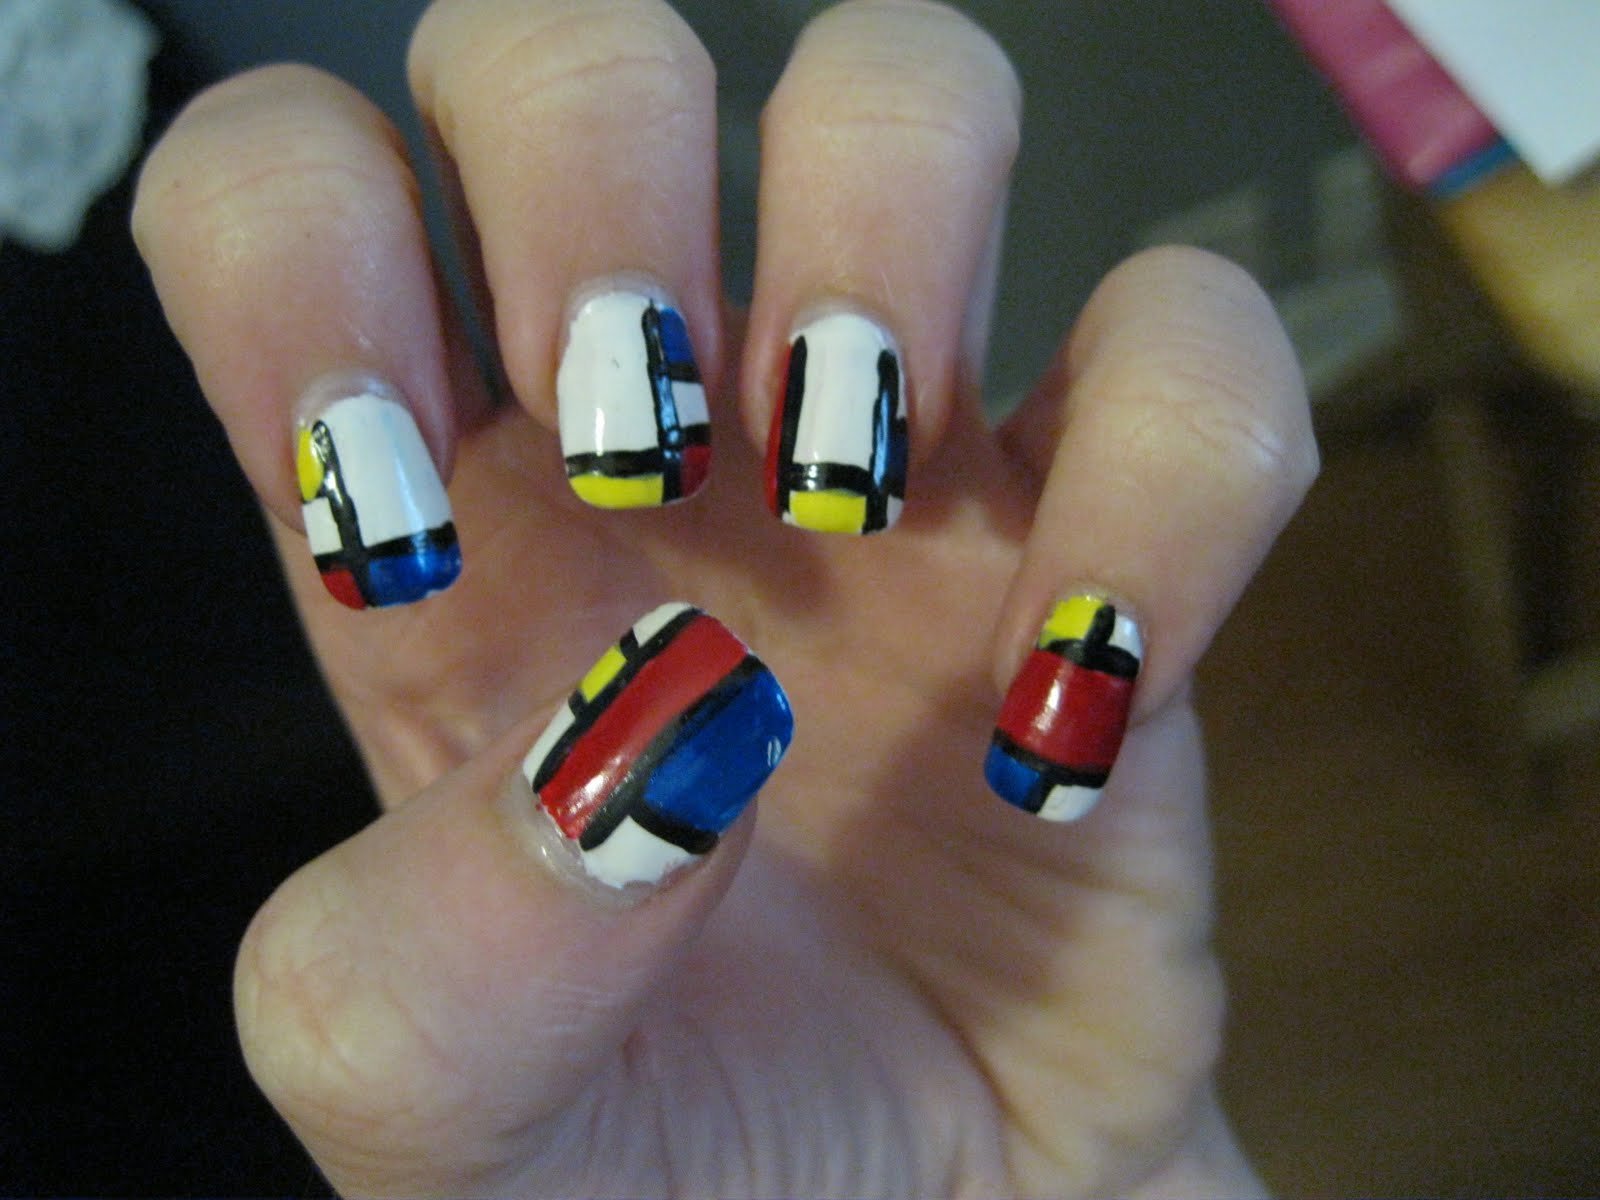 I feel in love with this blog called The Daily Nail, this is an attempt at